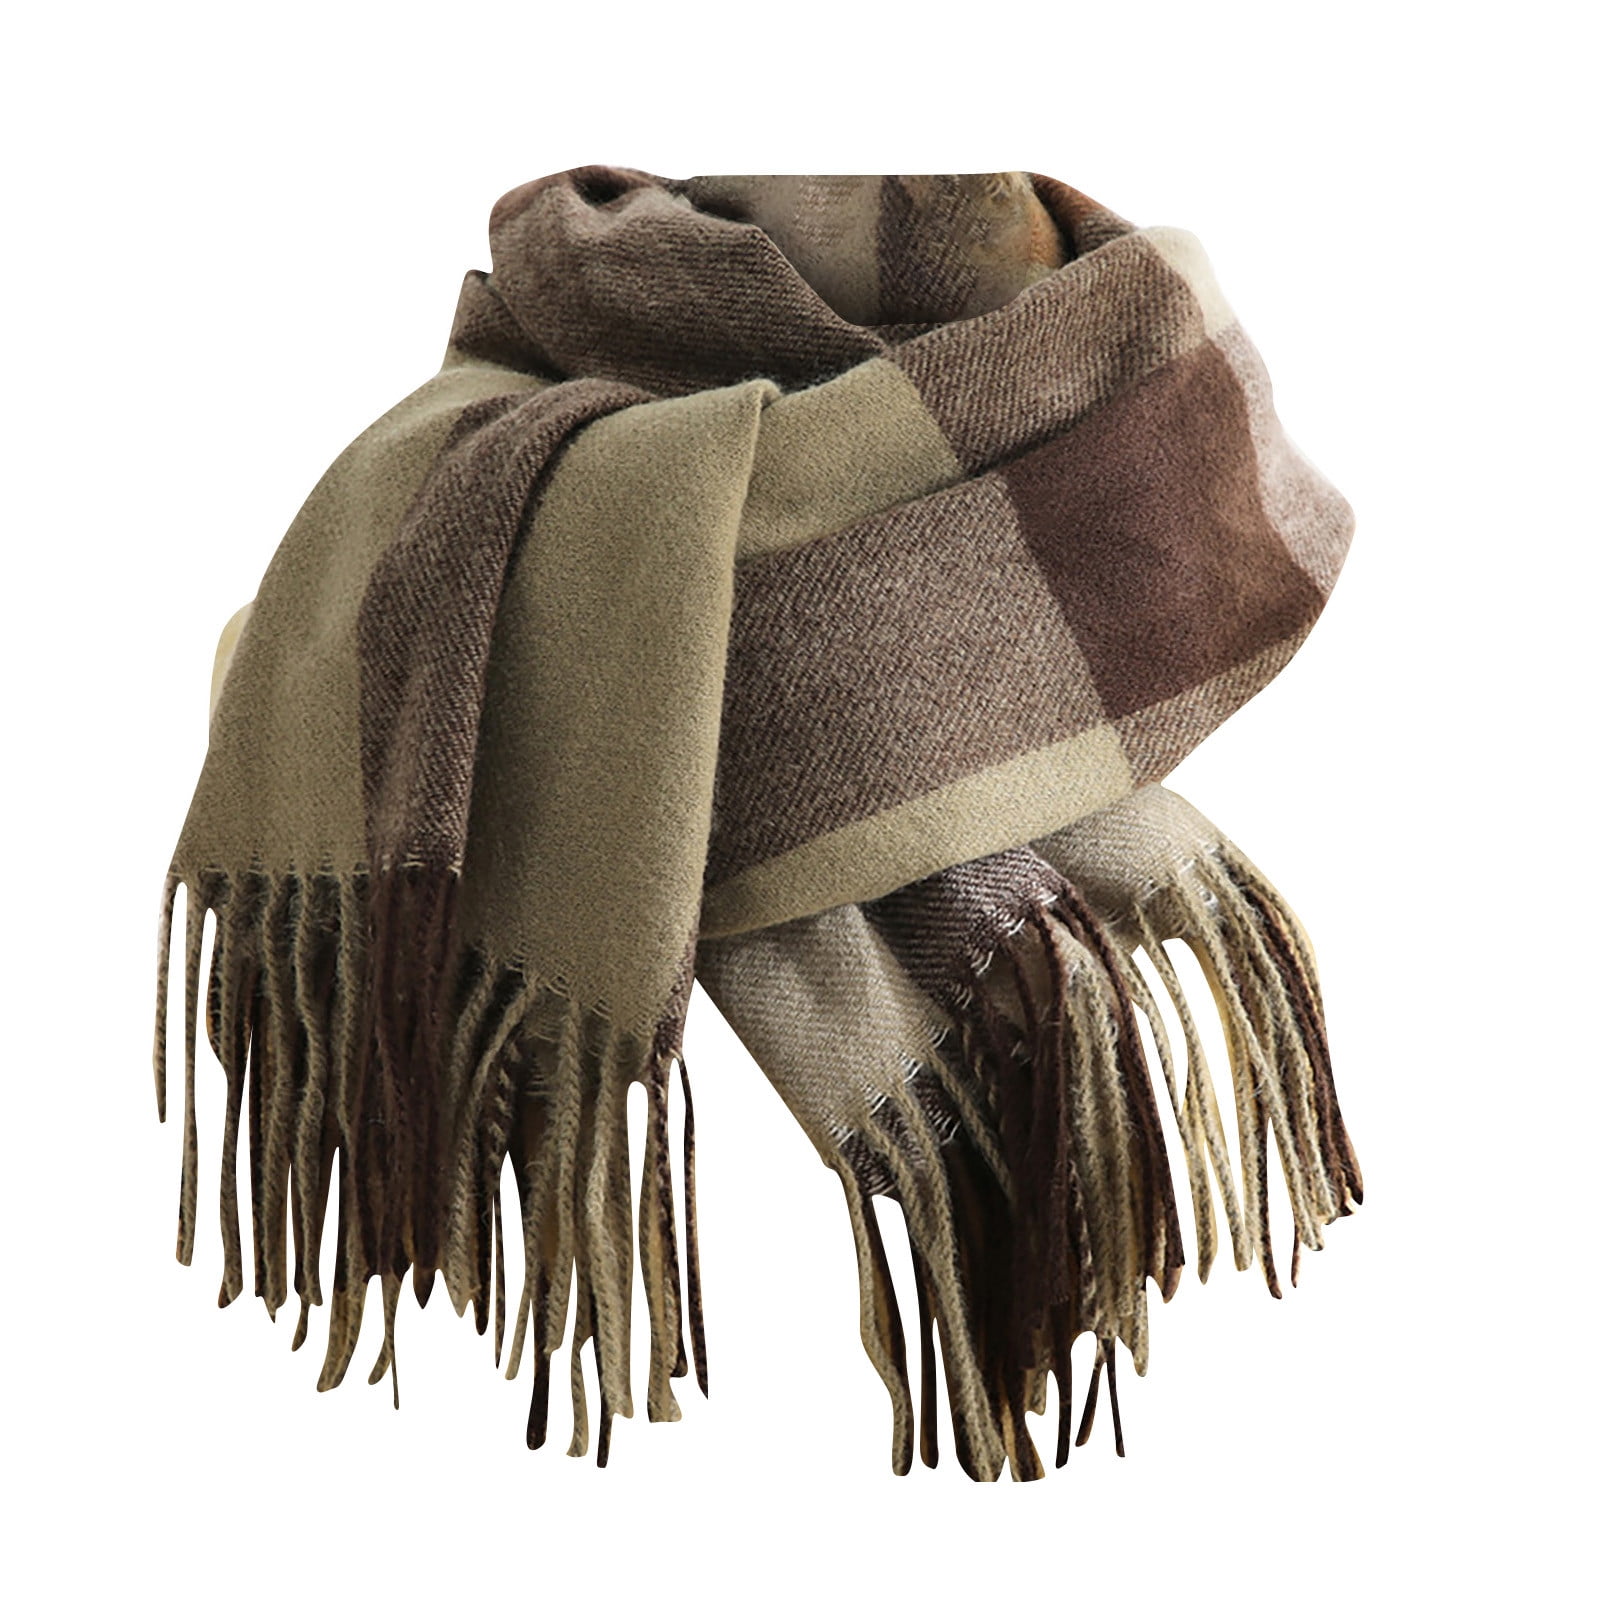 DENGDENG Long Womens Scarves Plaid Shawl Cape Scarf Tassel Scarf for Teen  Girls Brown Free Size